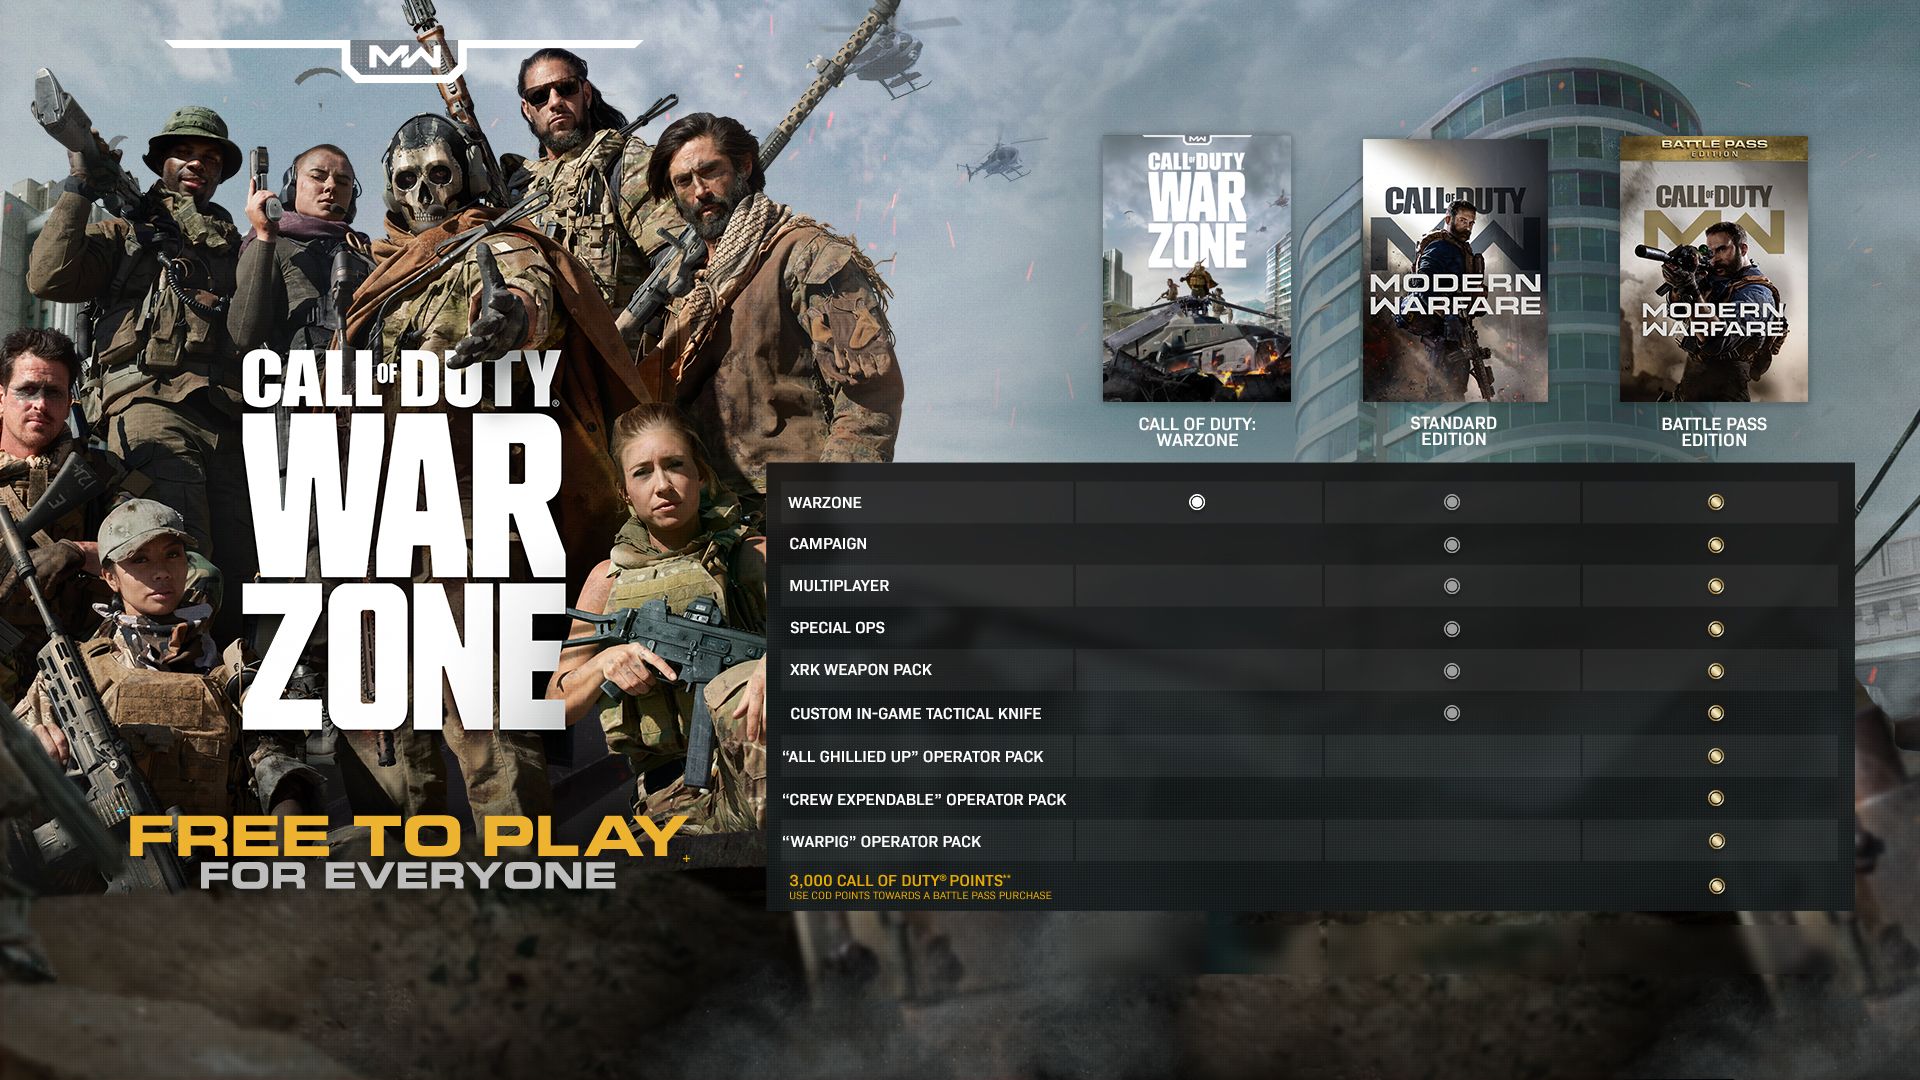 Call of Duty®: Warzone Free for Everyone on March 10